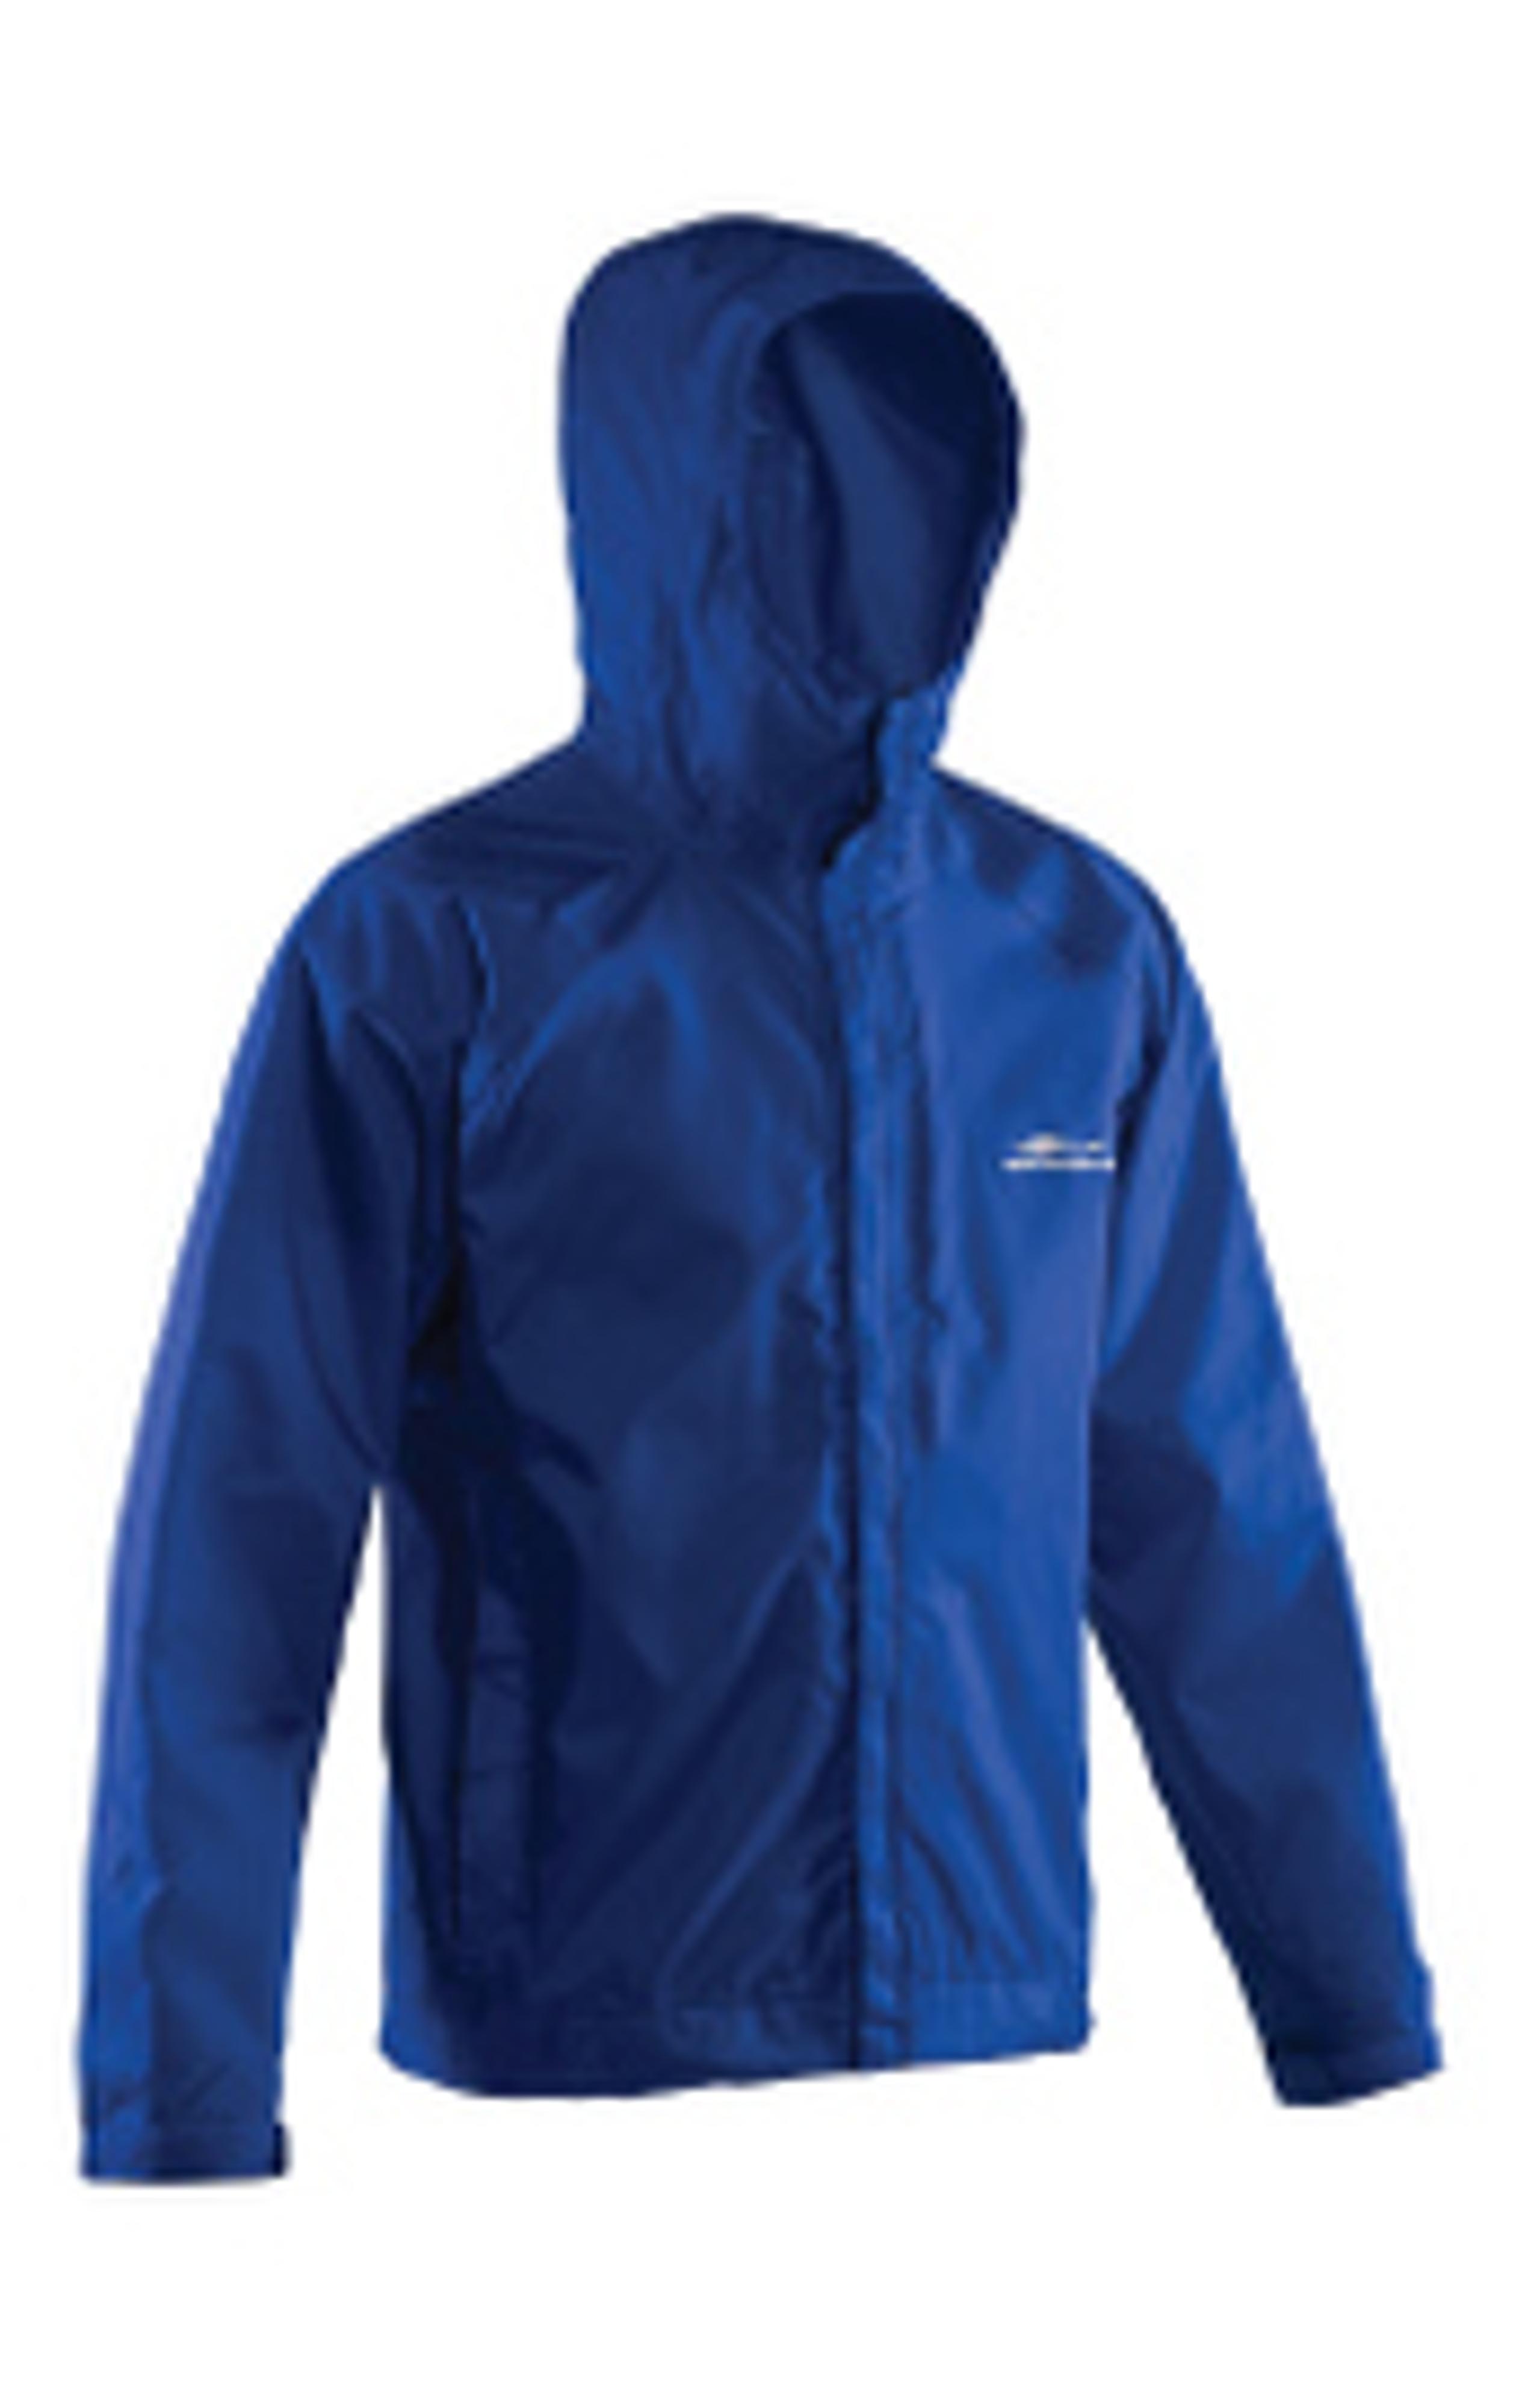 Weather Watch Hooded Sport Fishing Jacket: Fishermans Ideal Supply